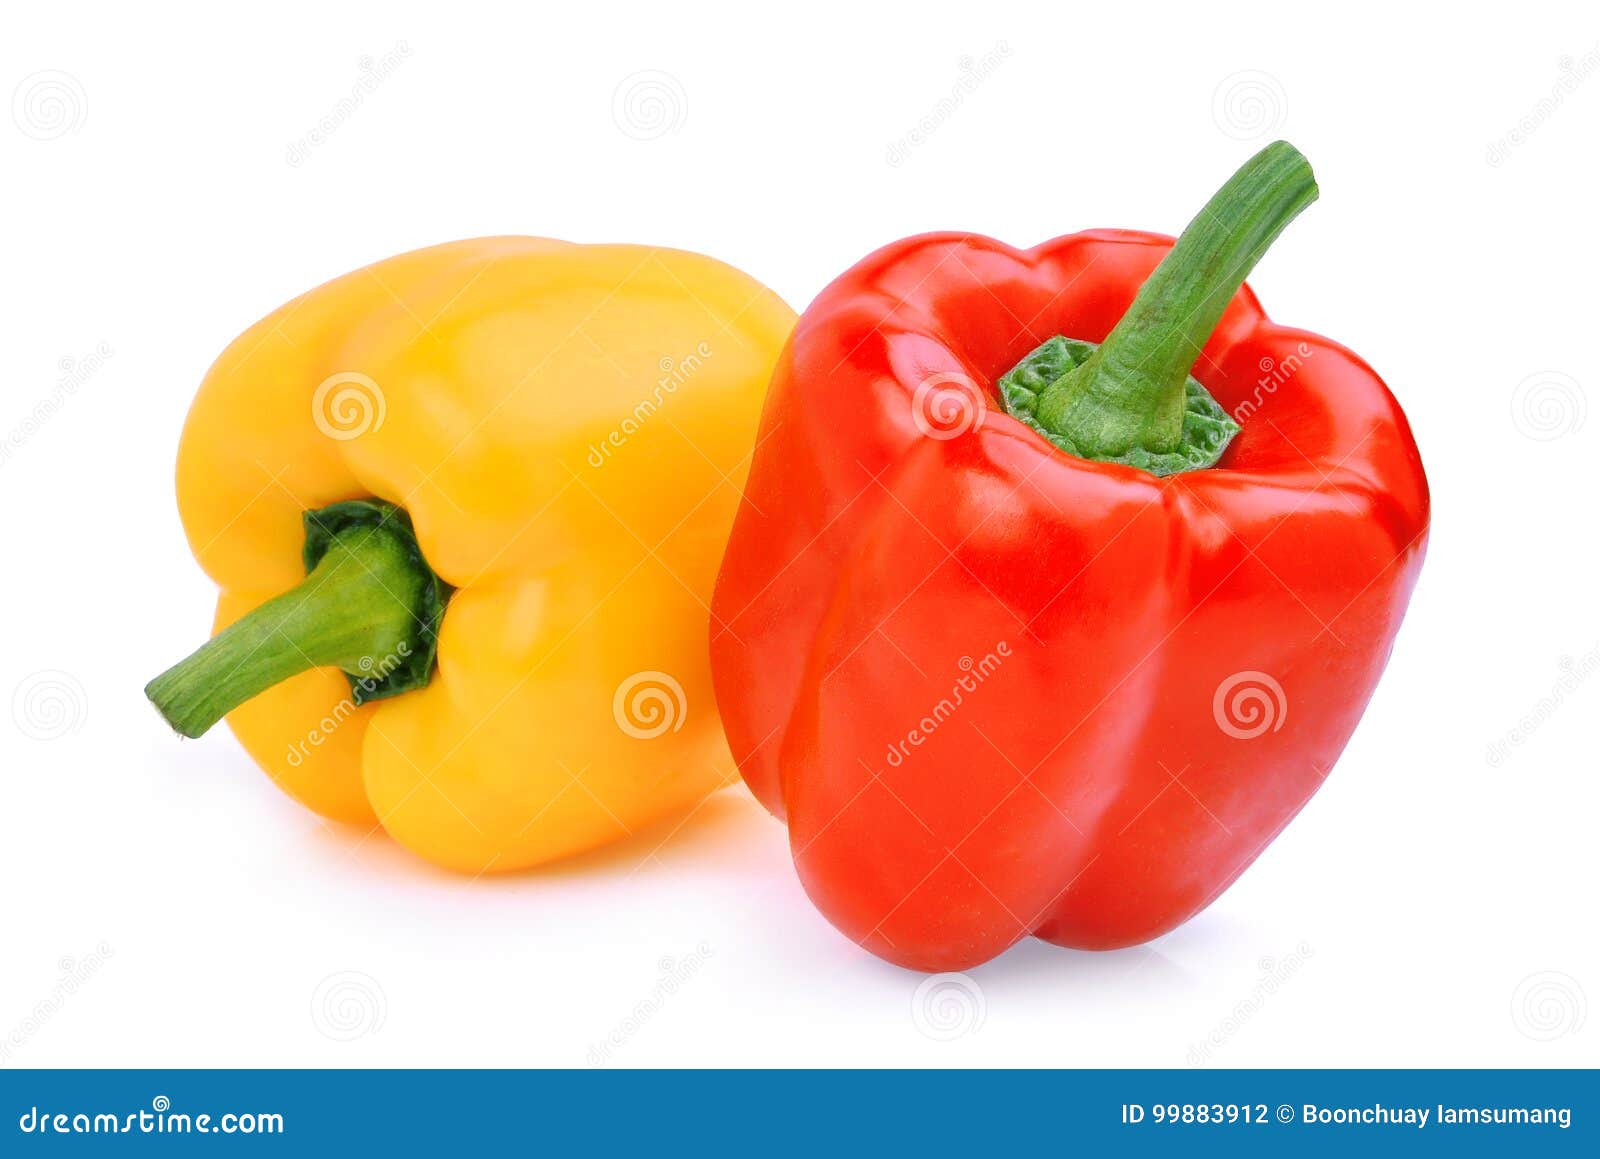 whole of yellow adn red sweet bell pepper or capsicum 